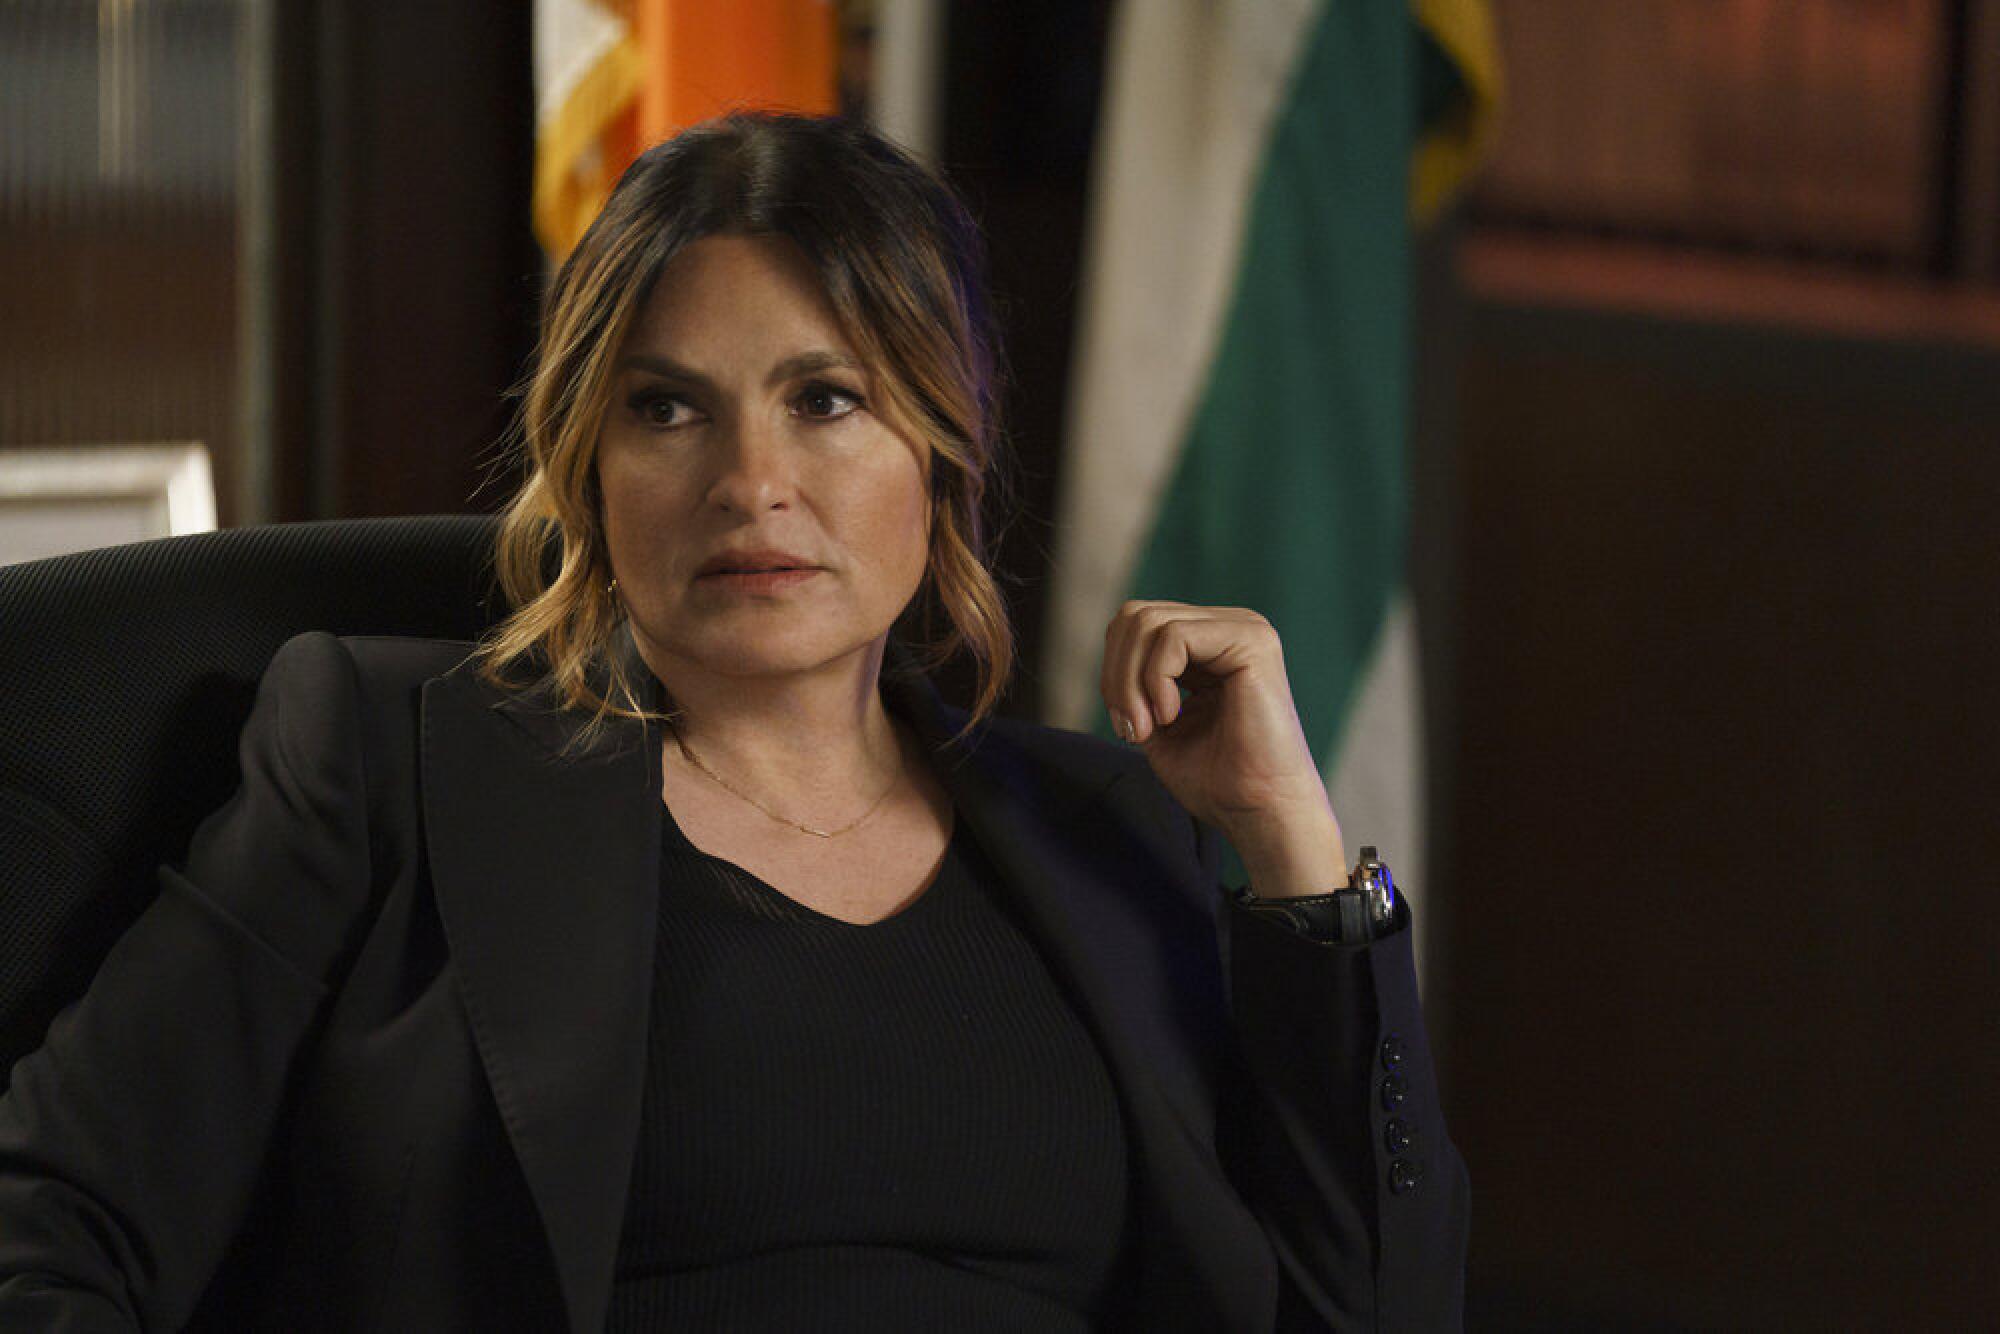 Olivia Benson, who is wearing a black shirt and blazer, sits in a dark chair.